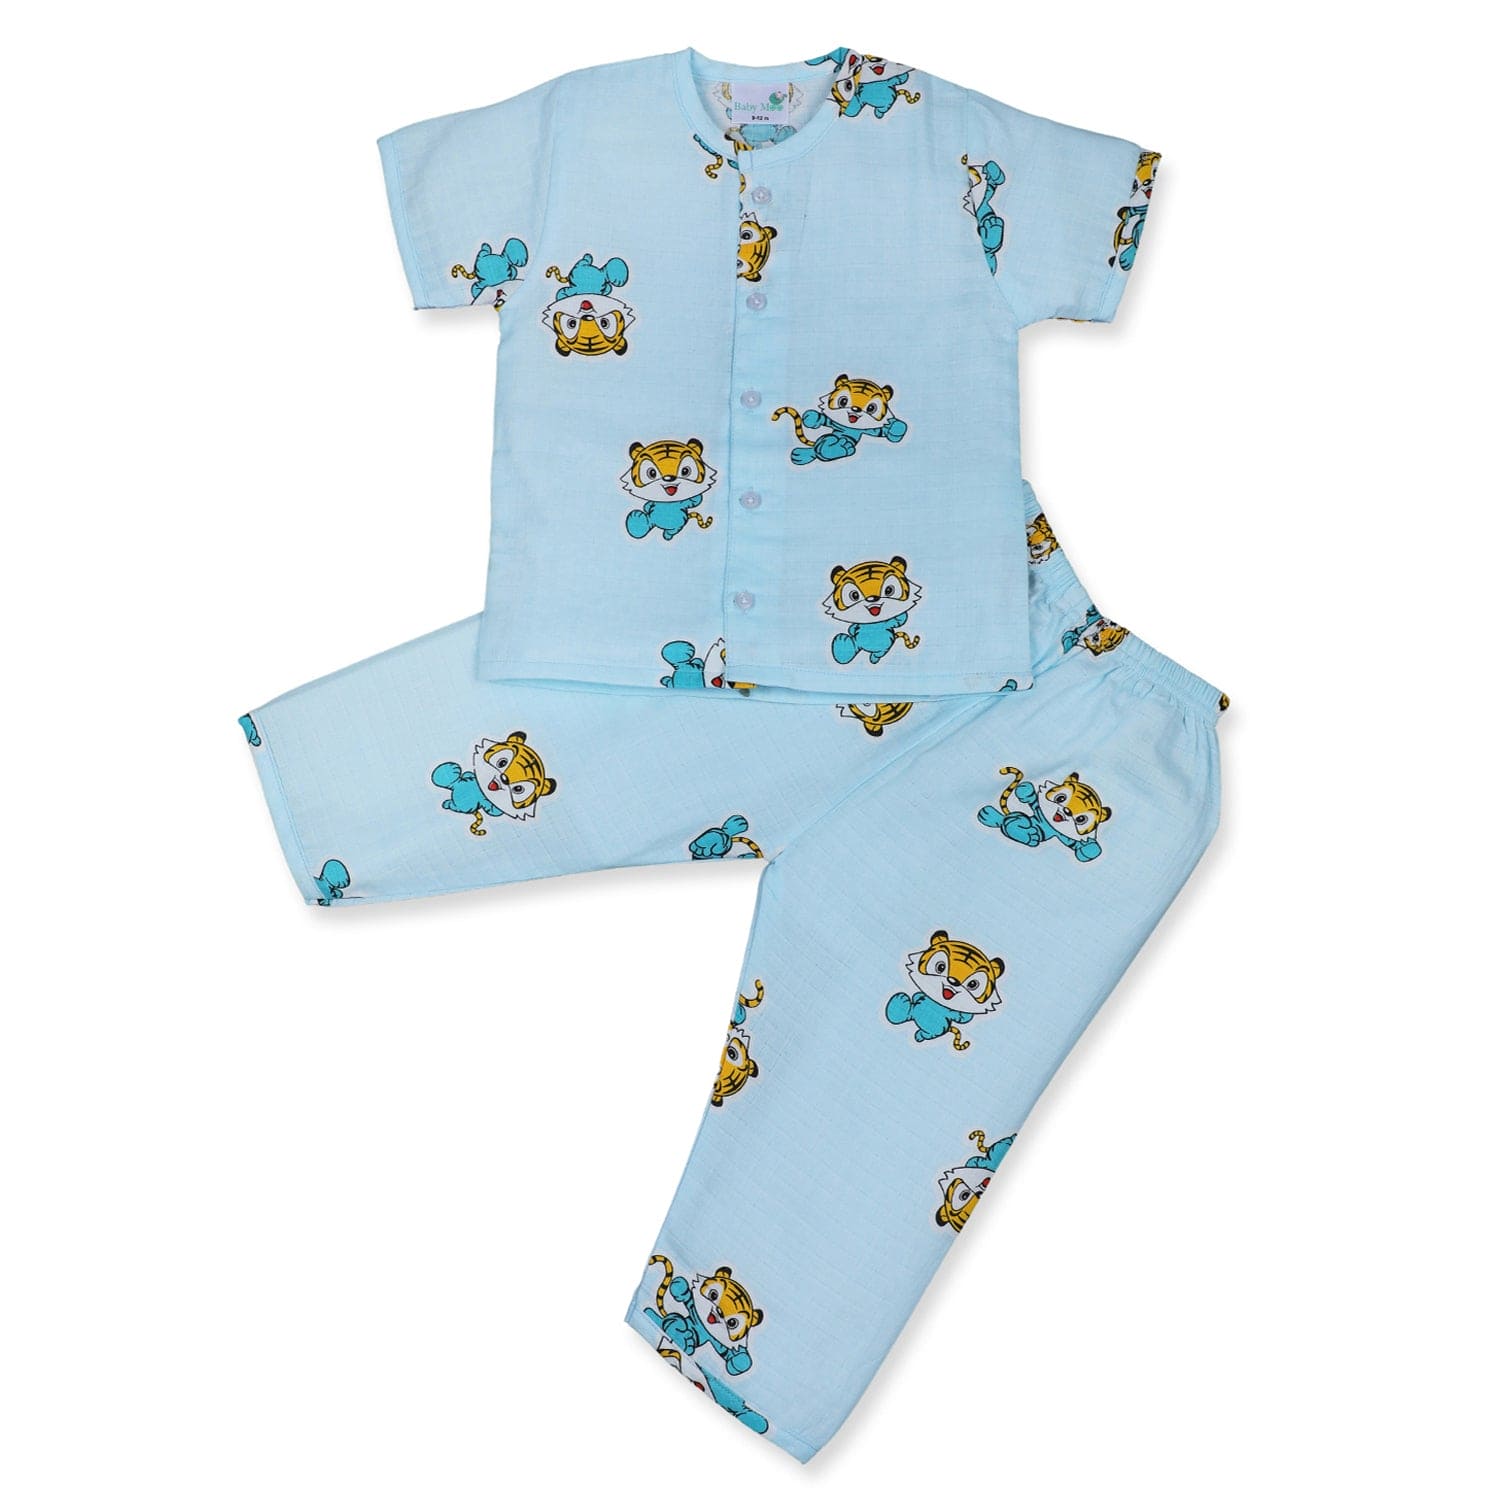 Chheent Baby Boys and Girl's Premium Cotton Night Suit (Printed T-Shirt &  Pant Set/Boys